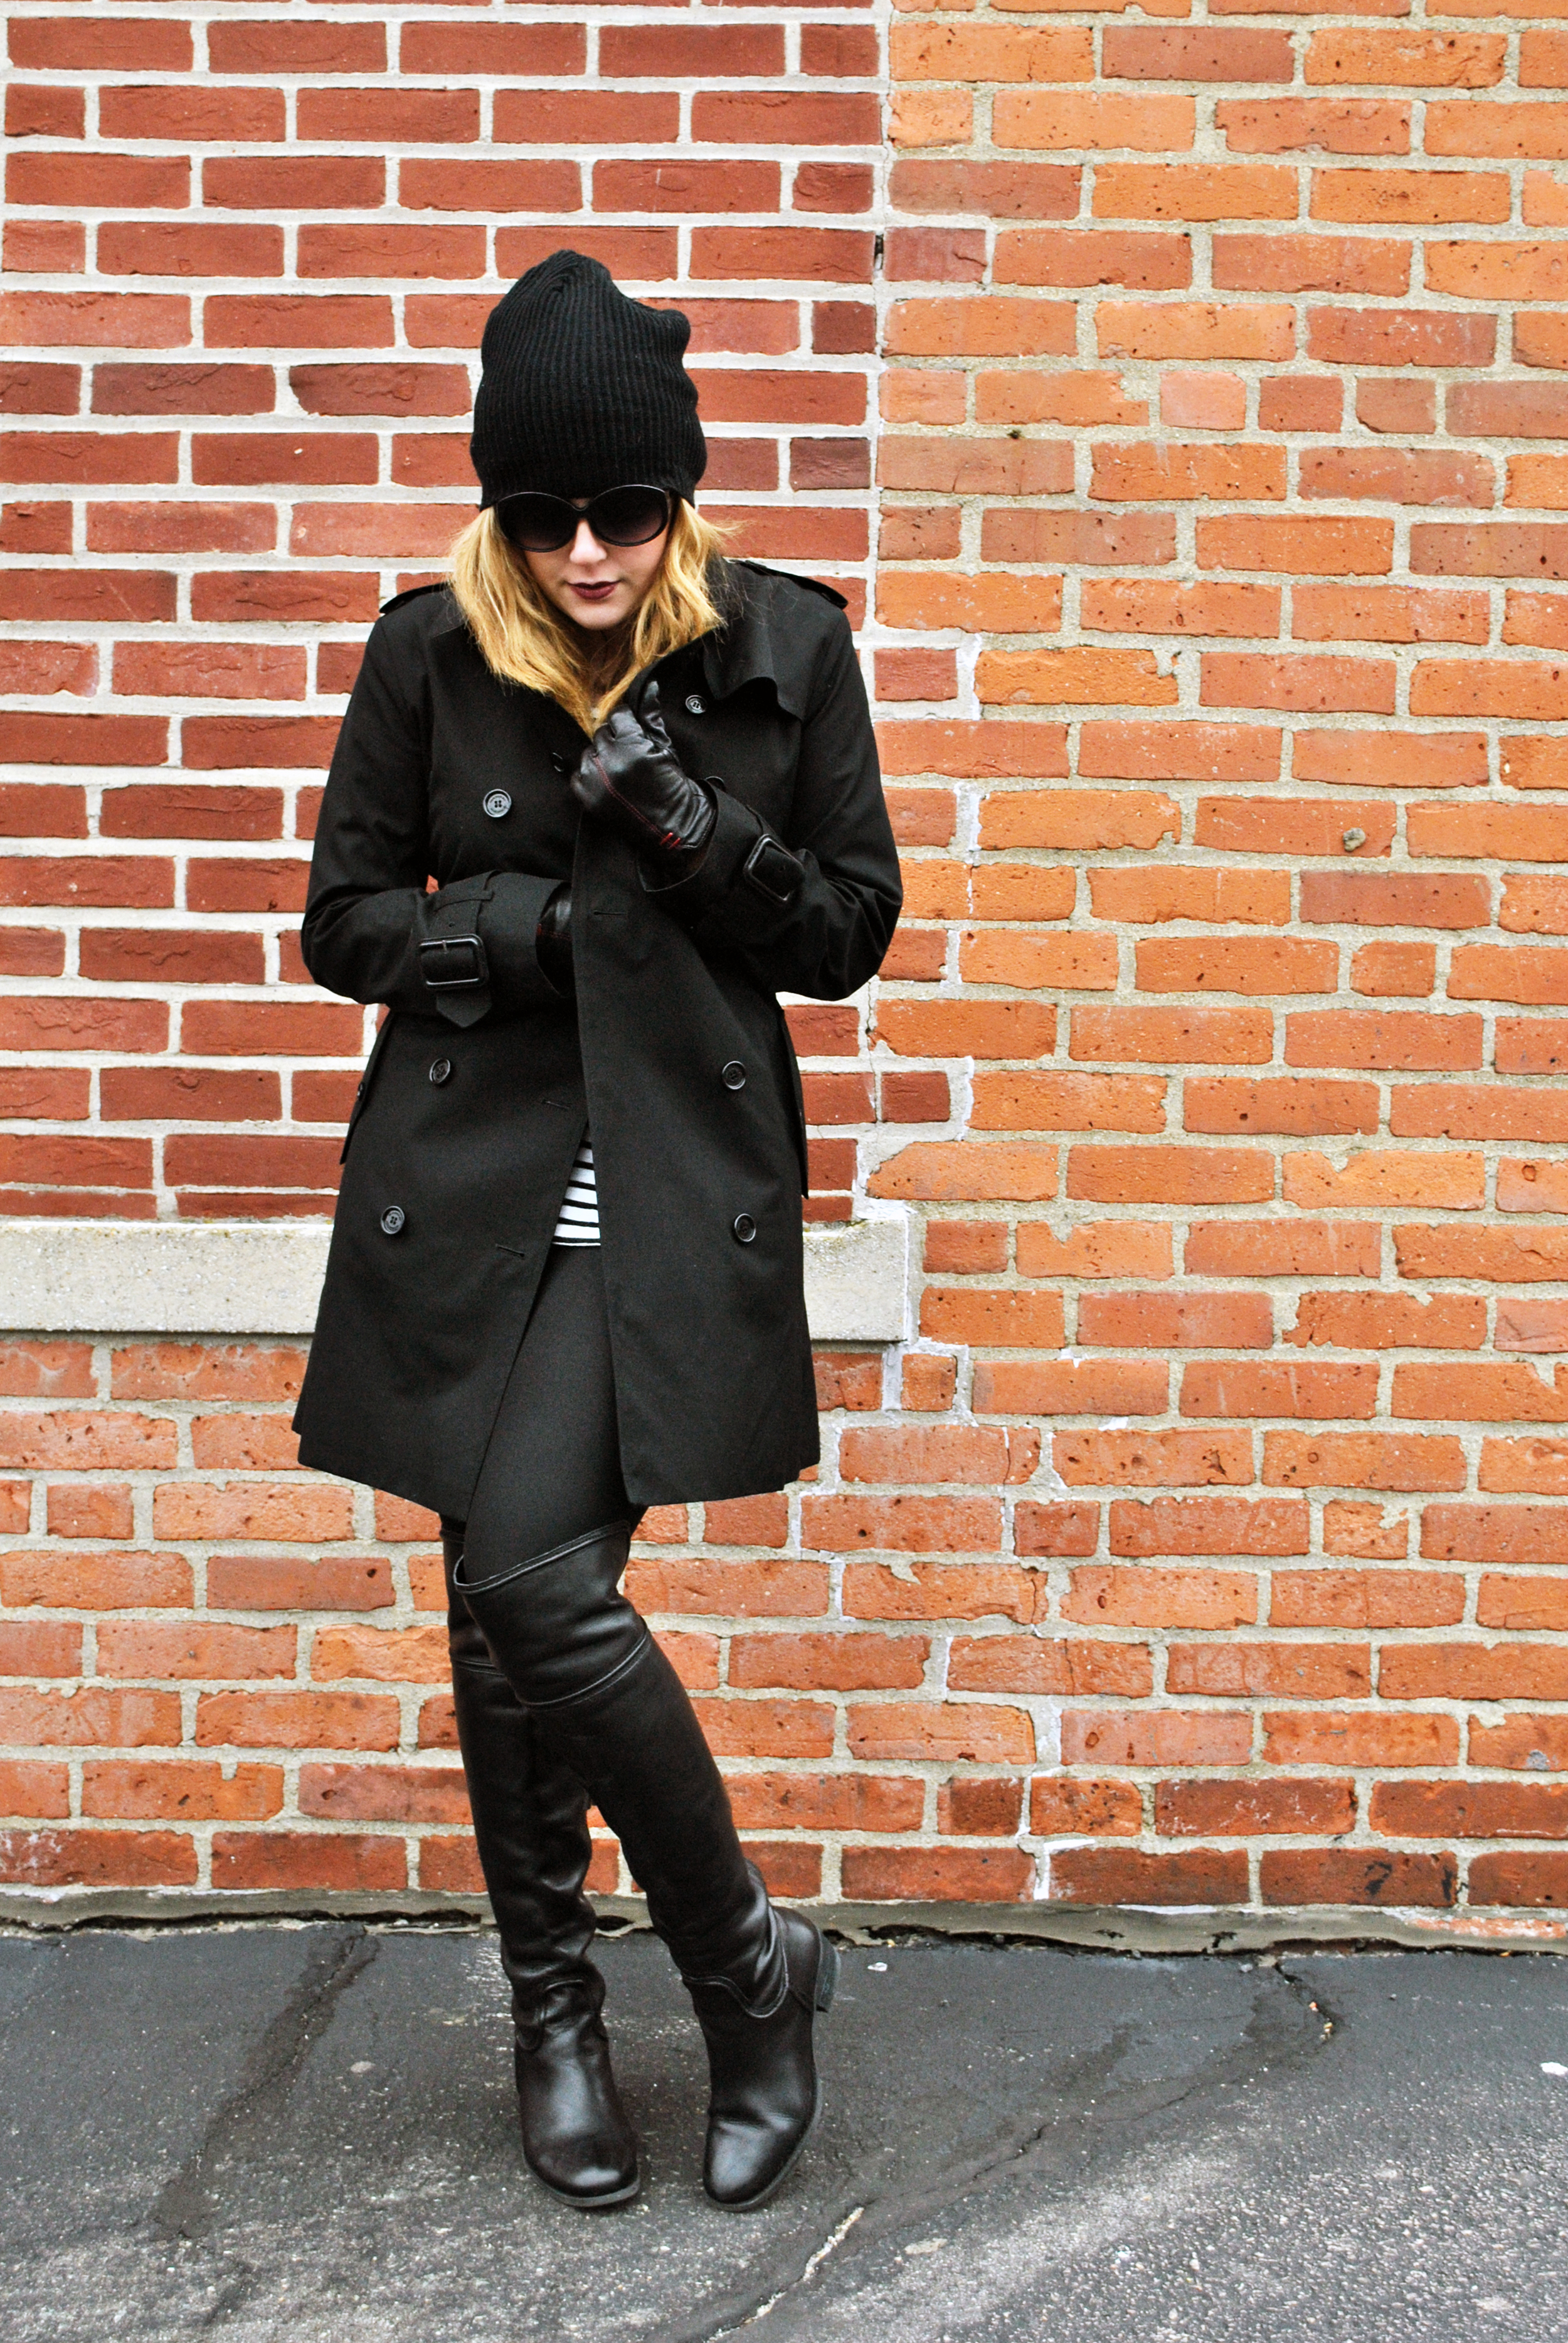 Black trench with stripes and leather | thoughtfulwish